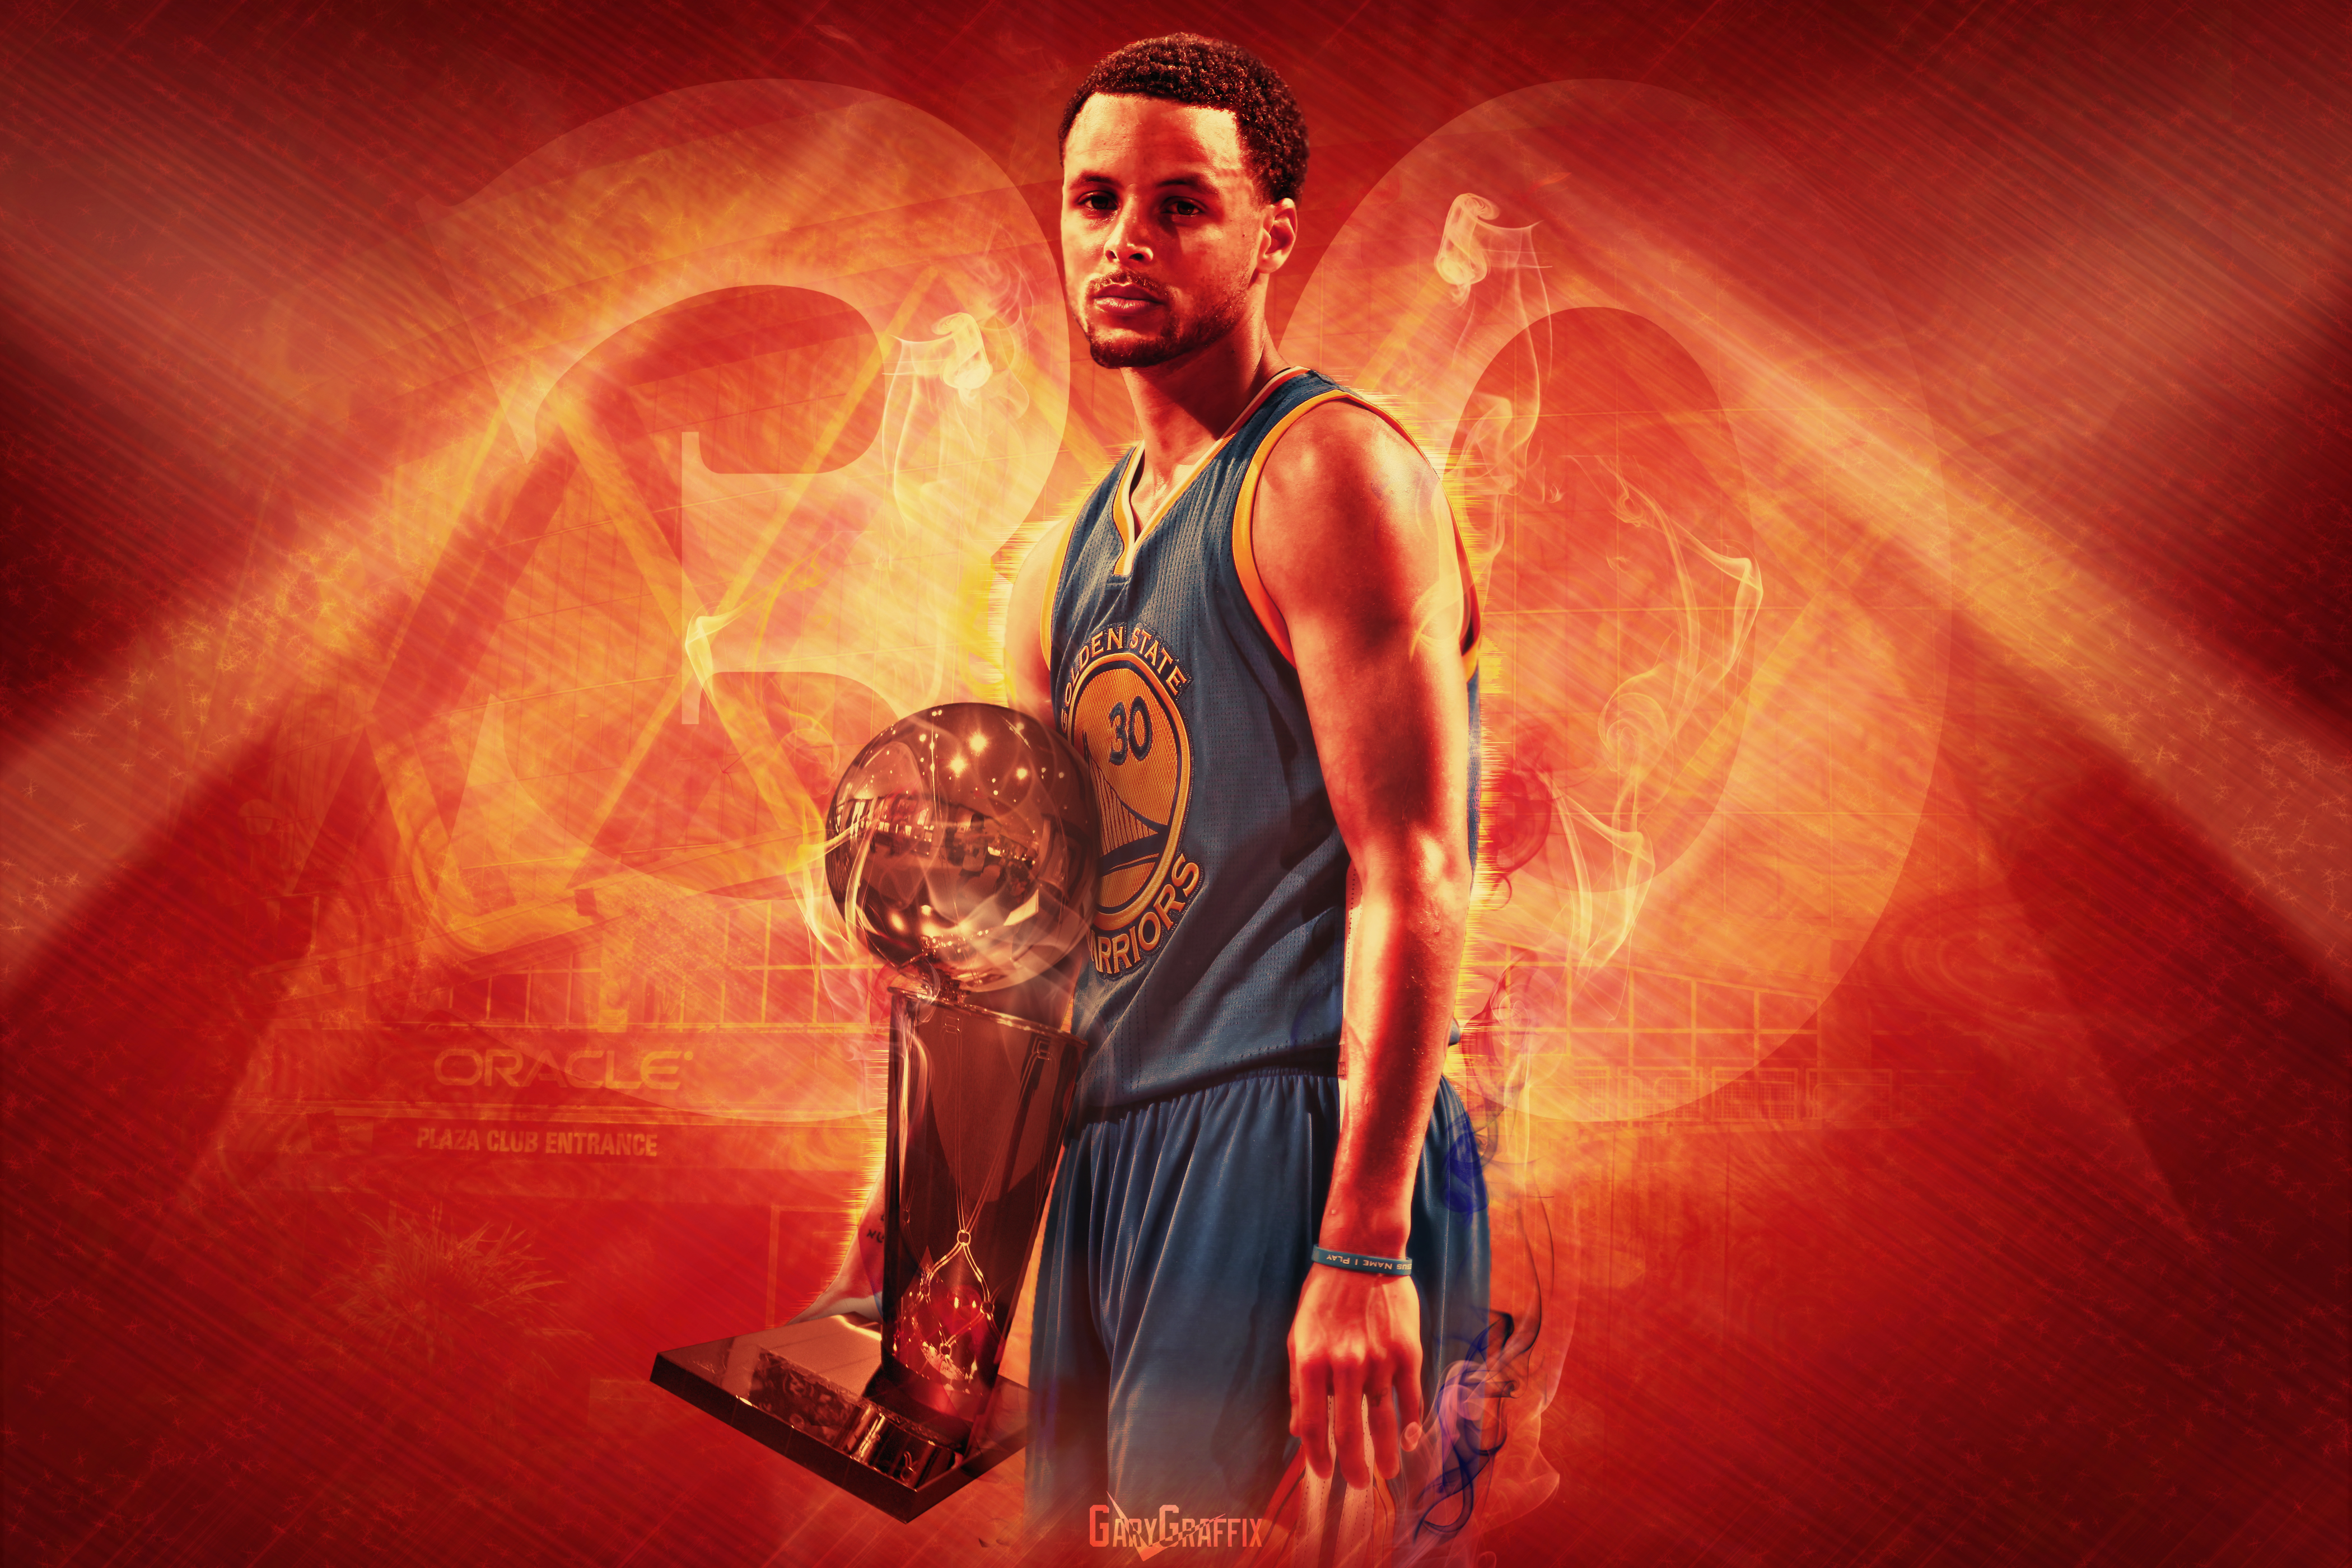 Stephen Curry Wallpapers Blog Wallpapers Clyde Graffix Images, Photos, Reviews